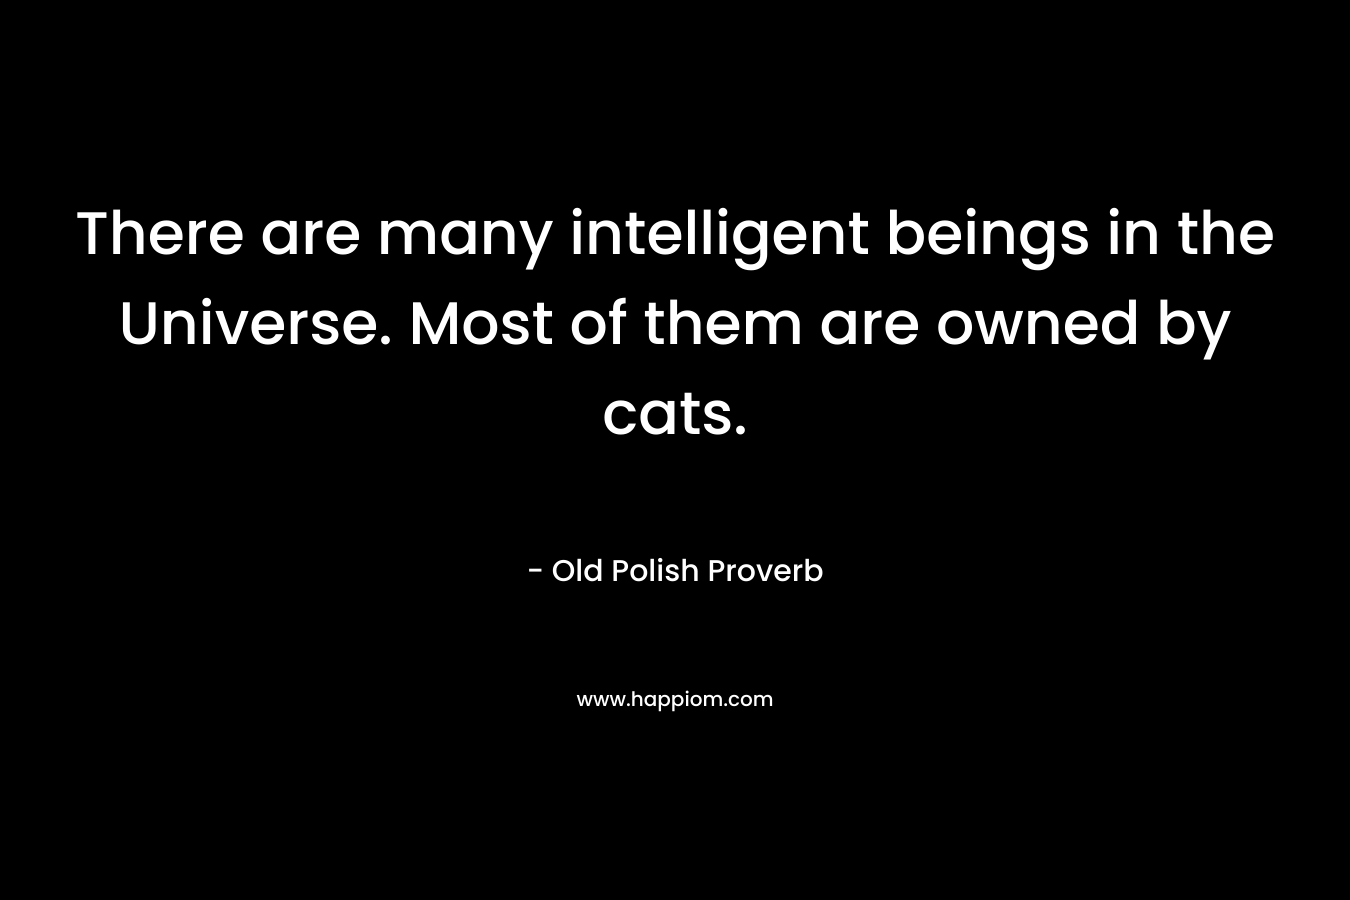 There are many intelligent beings in the Universe. Most of them are owned by cats.